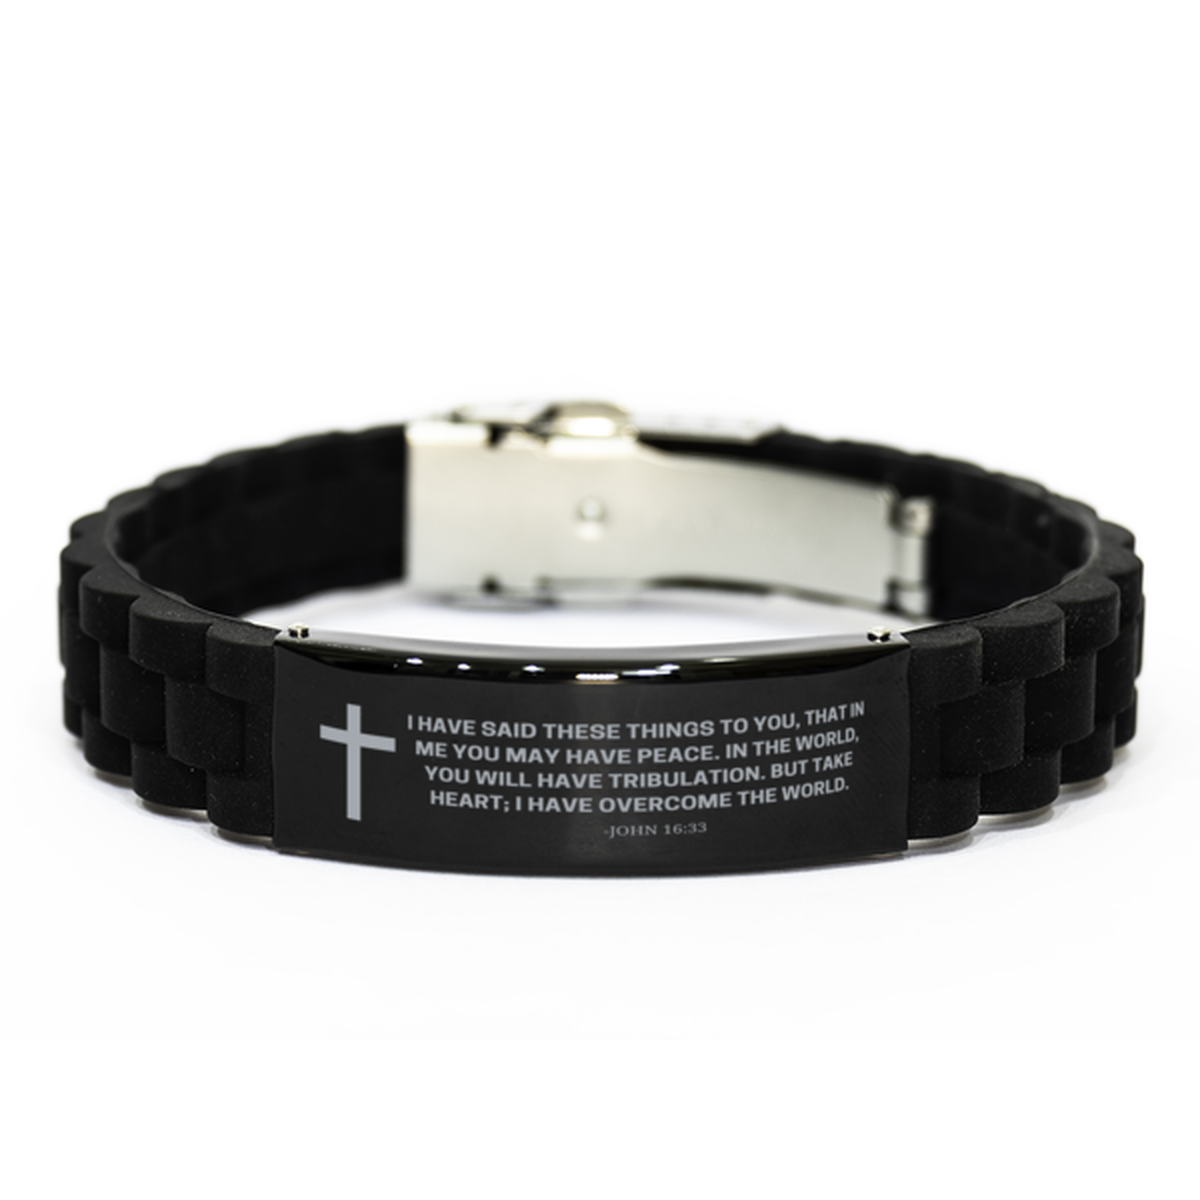 Baptism Gifts For Teenage Boys Girls, Christian Bible Verse Black Glidelock Clasp Bracelet, I have said these things, Catholic Confirmation Gifts for Son, Godson, Grandson, Nephew